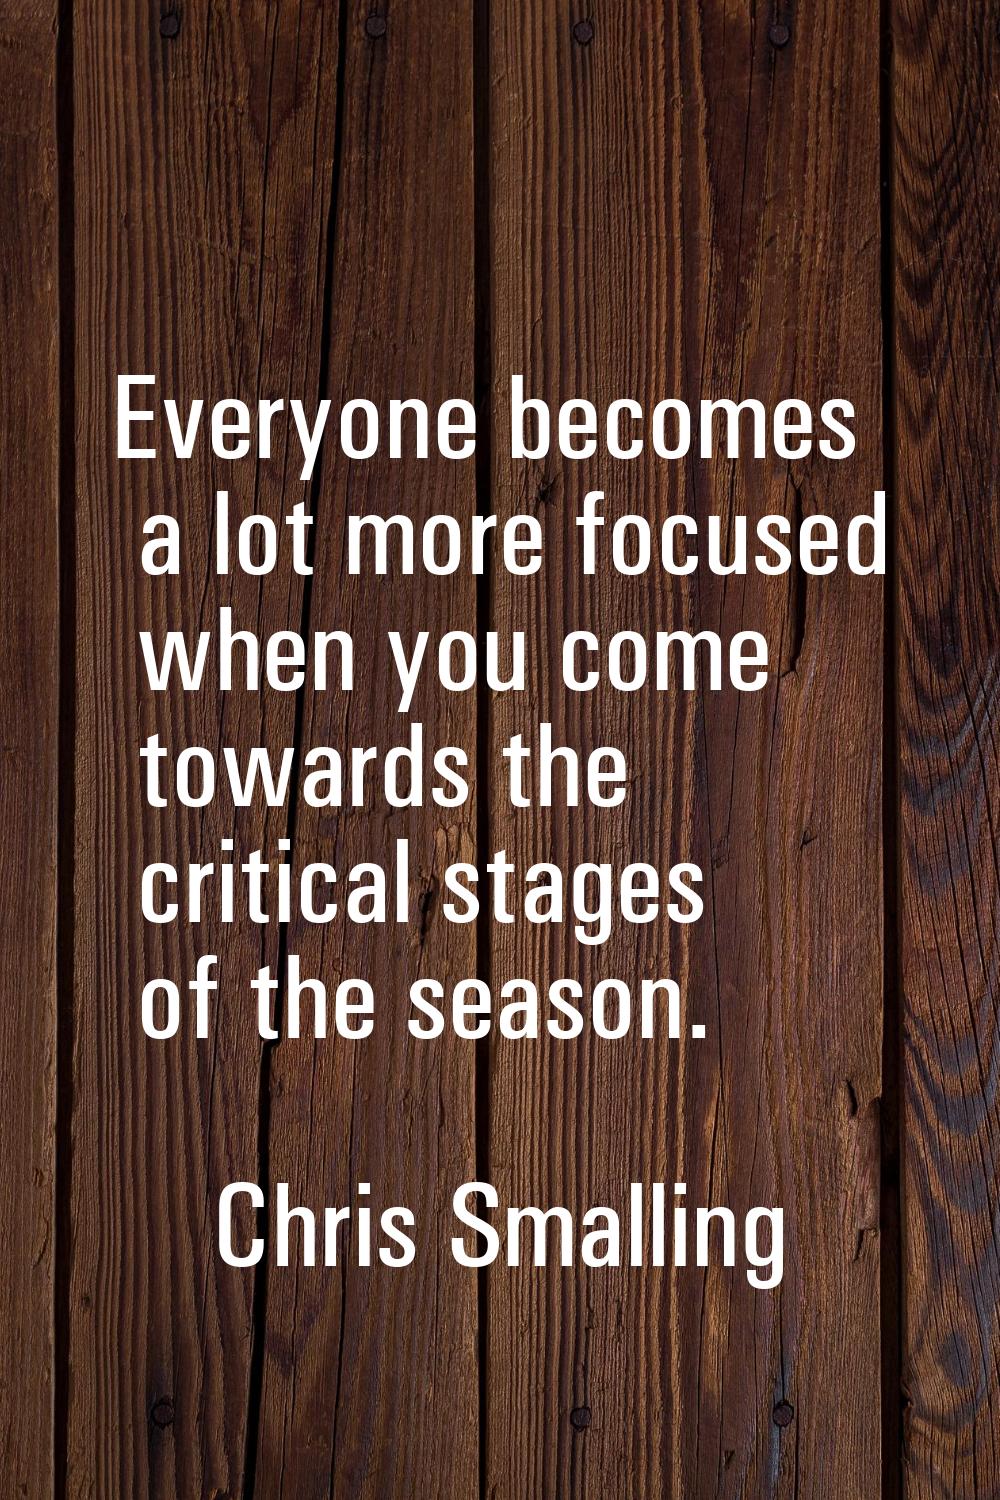 Everyone becomes a lot more focused when you come towards the critical stages of the season.